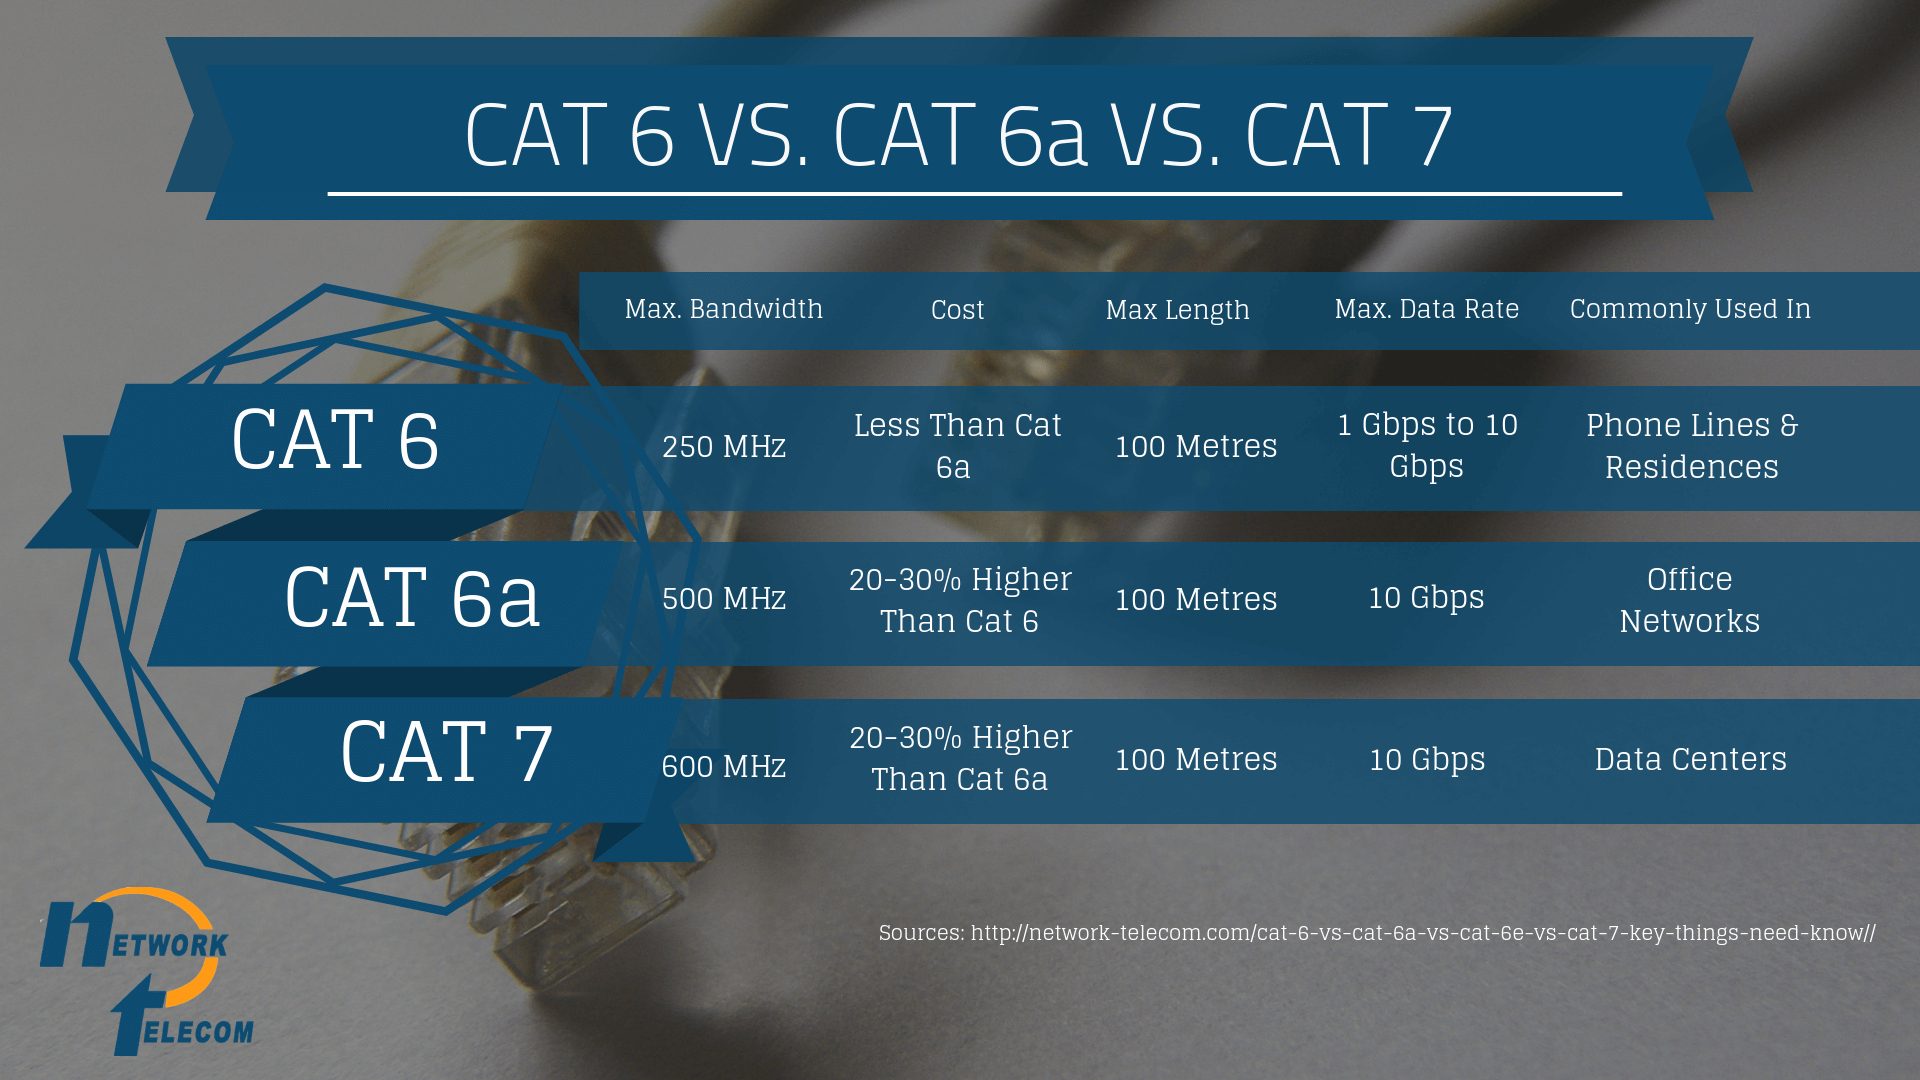 Cat 6 vs Cat 6a vs Cat 7 What are the differences?